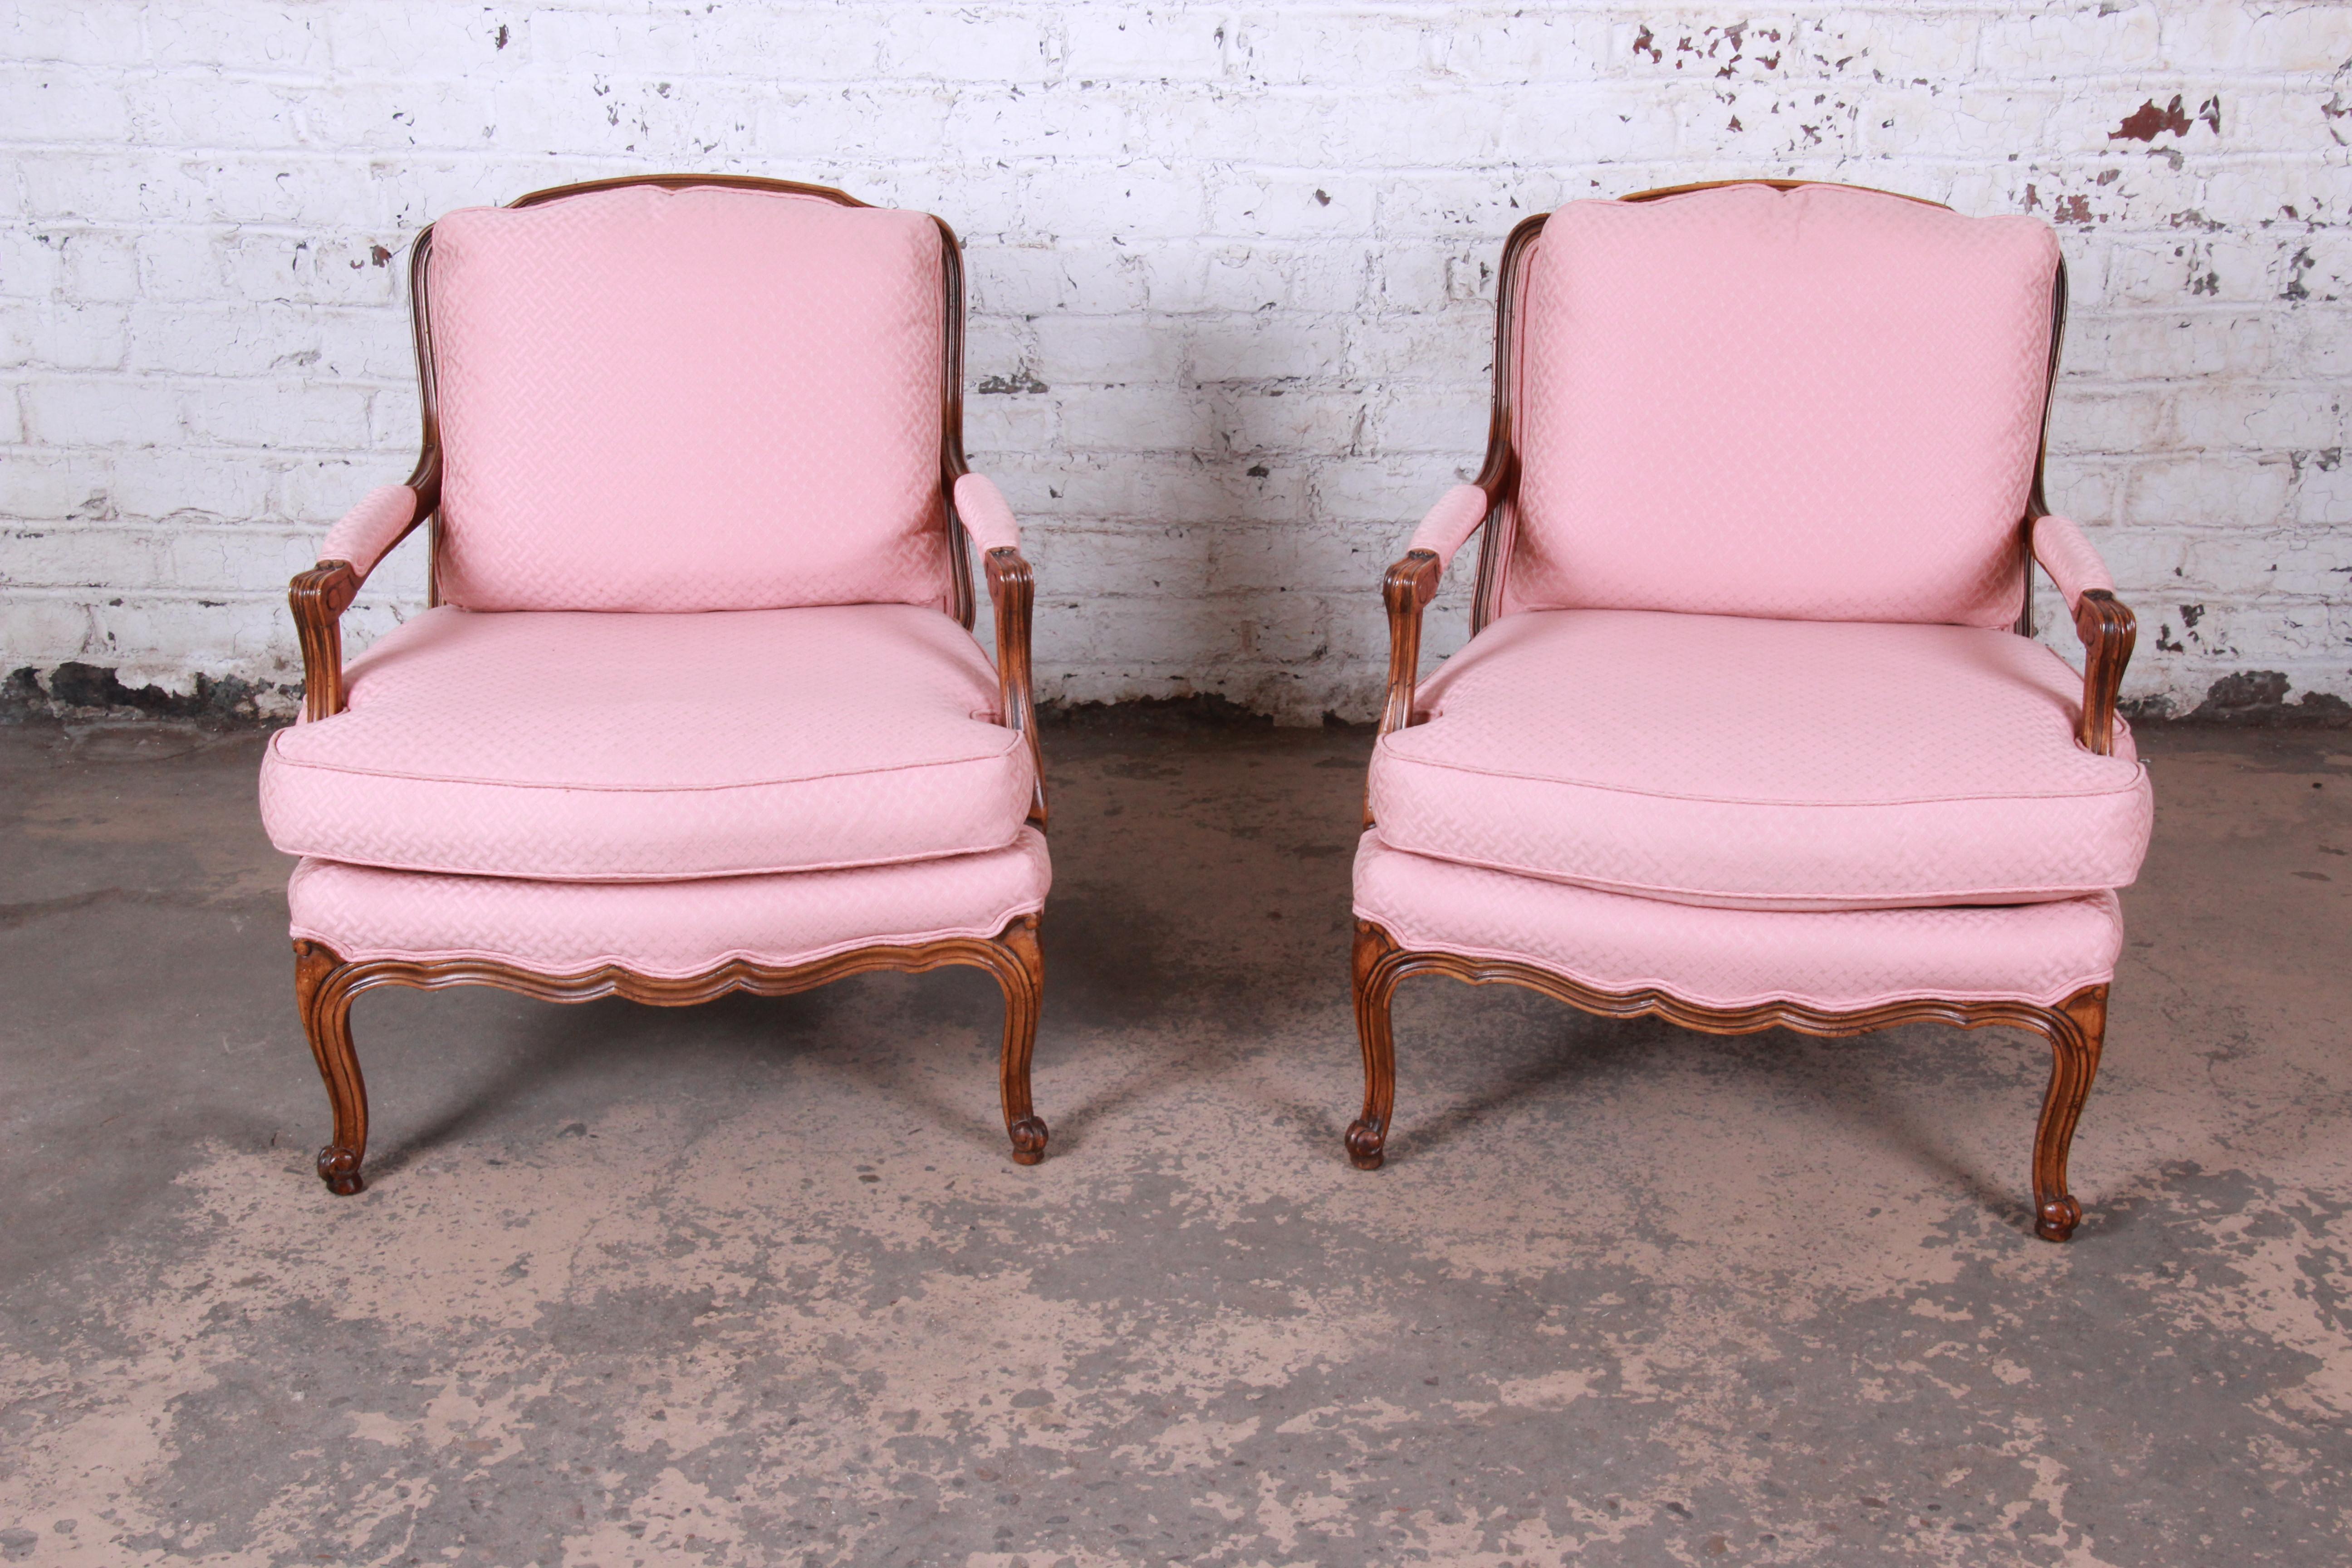 French Provincial Louis XV style lounge chairs

Produced by Baker Furniture

USA, circa 1980s

Measures: 29